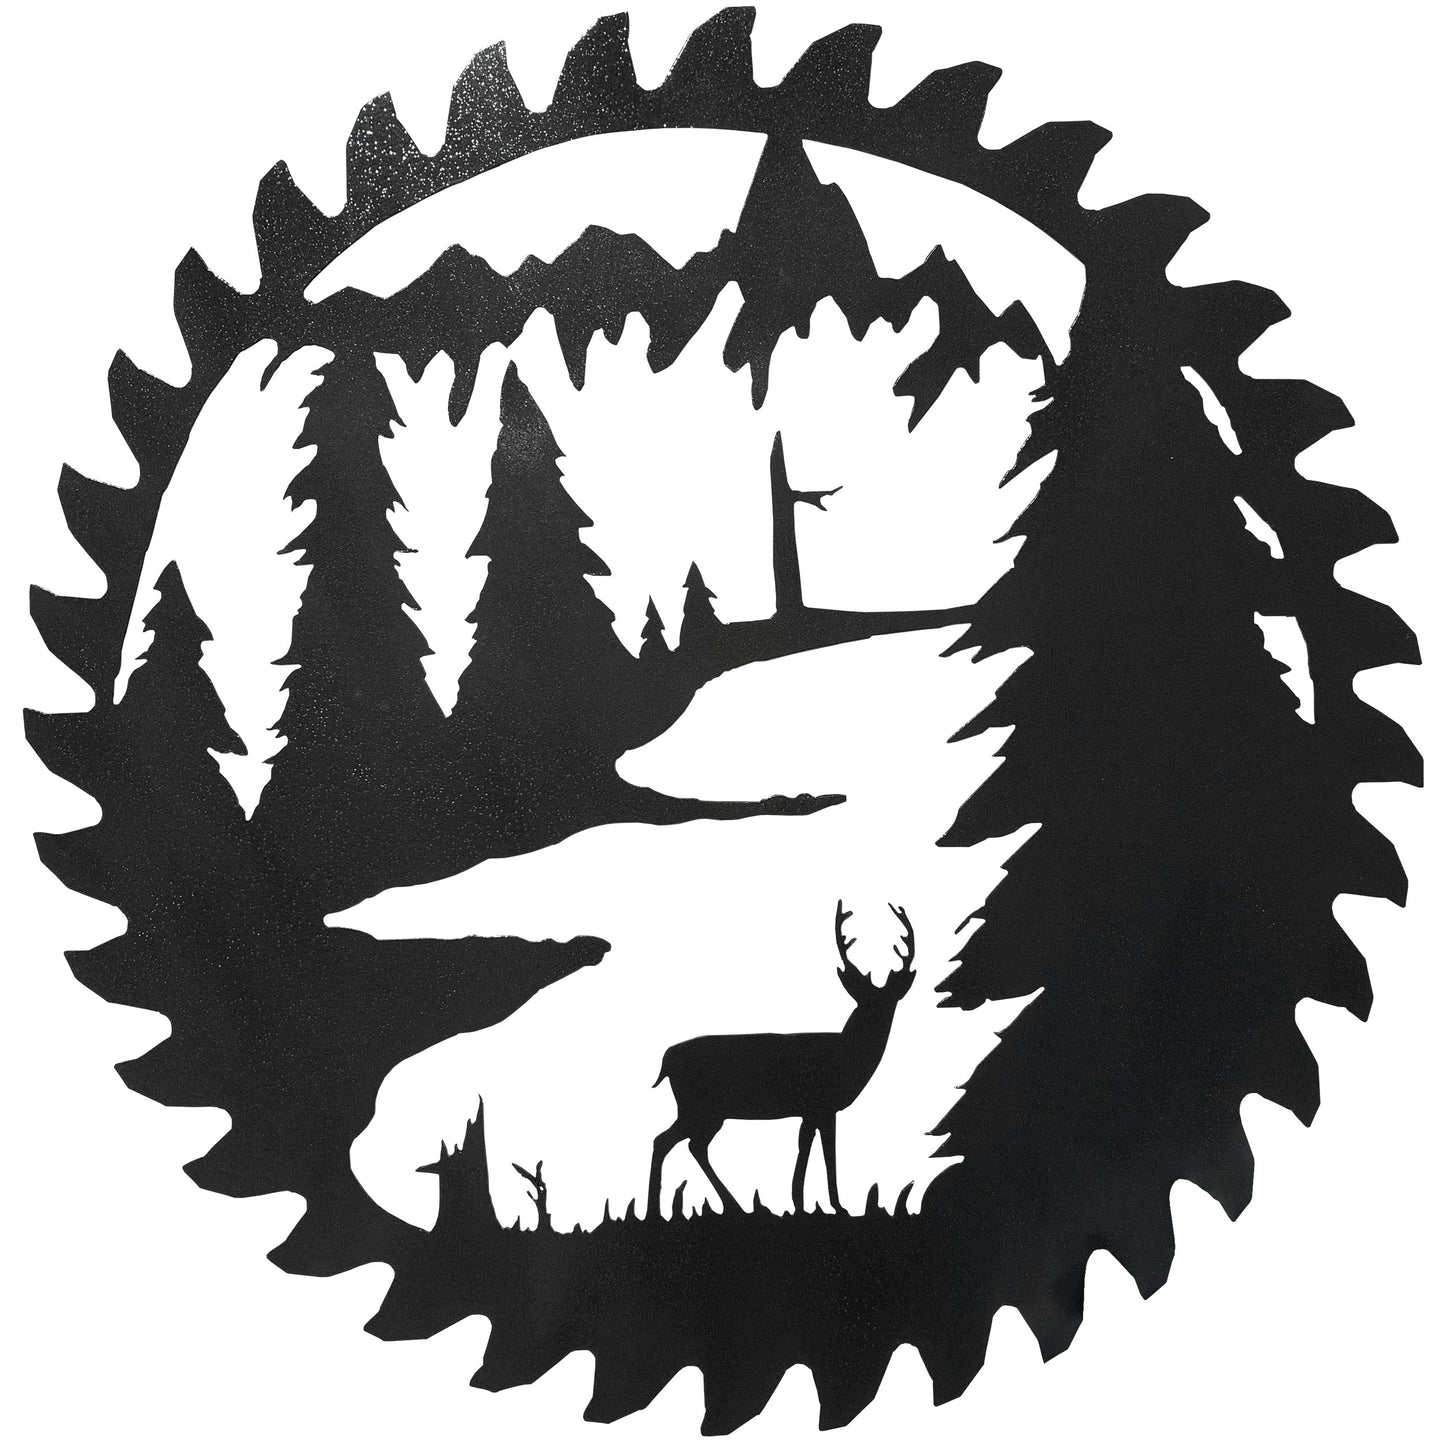 the deer standing among the trees in this reproduction of an authentic buzz saw blade with a hammered black finish